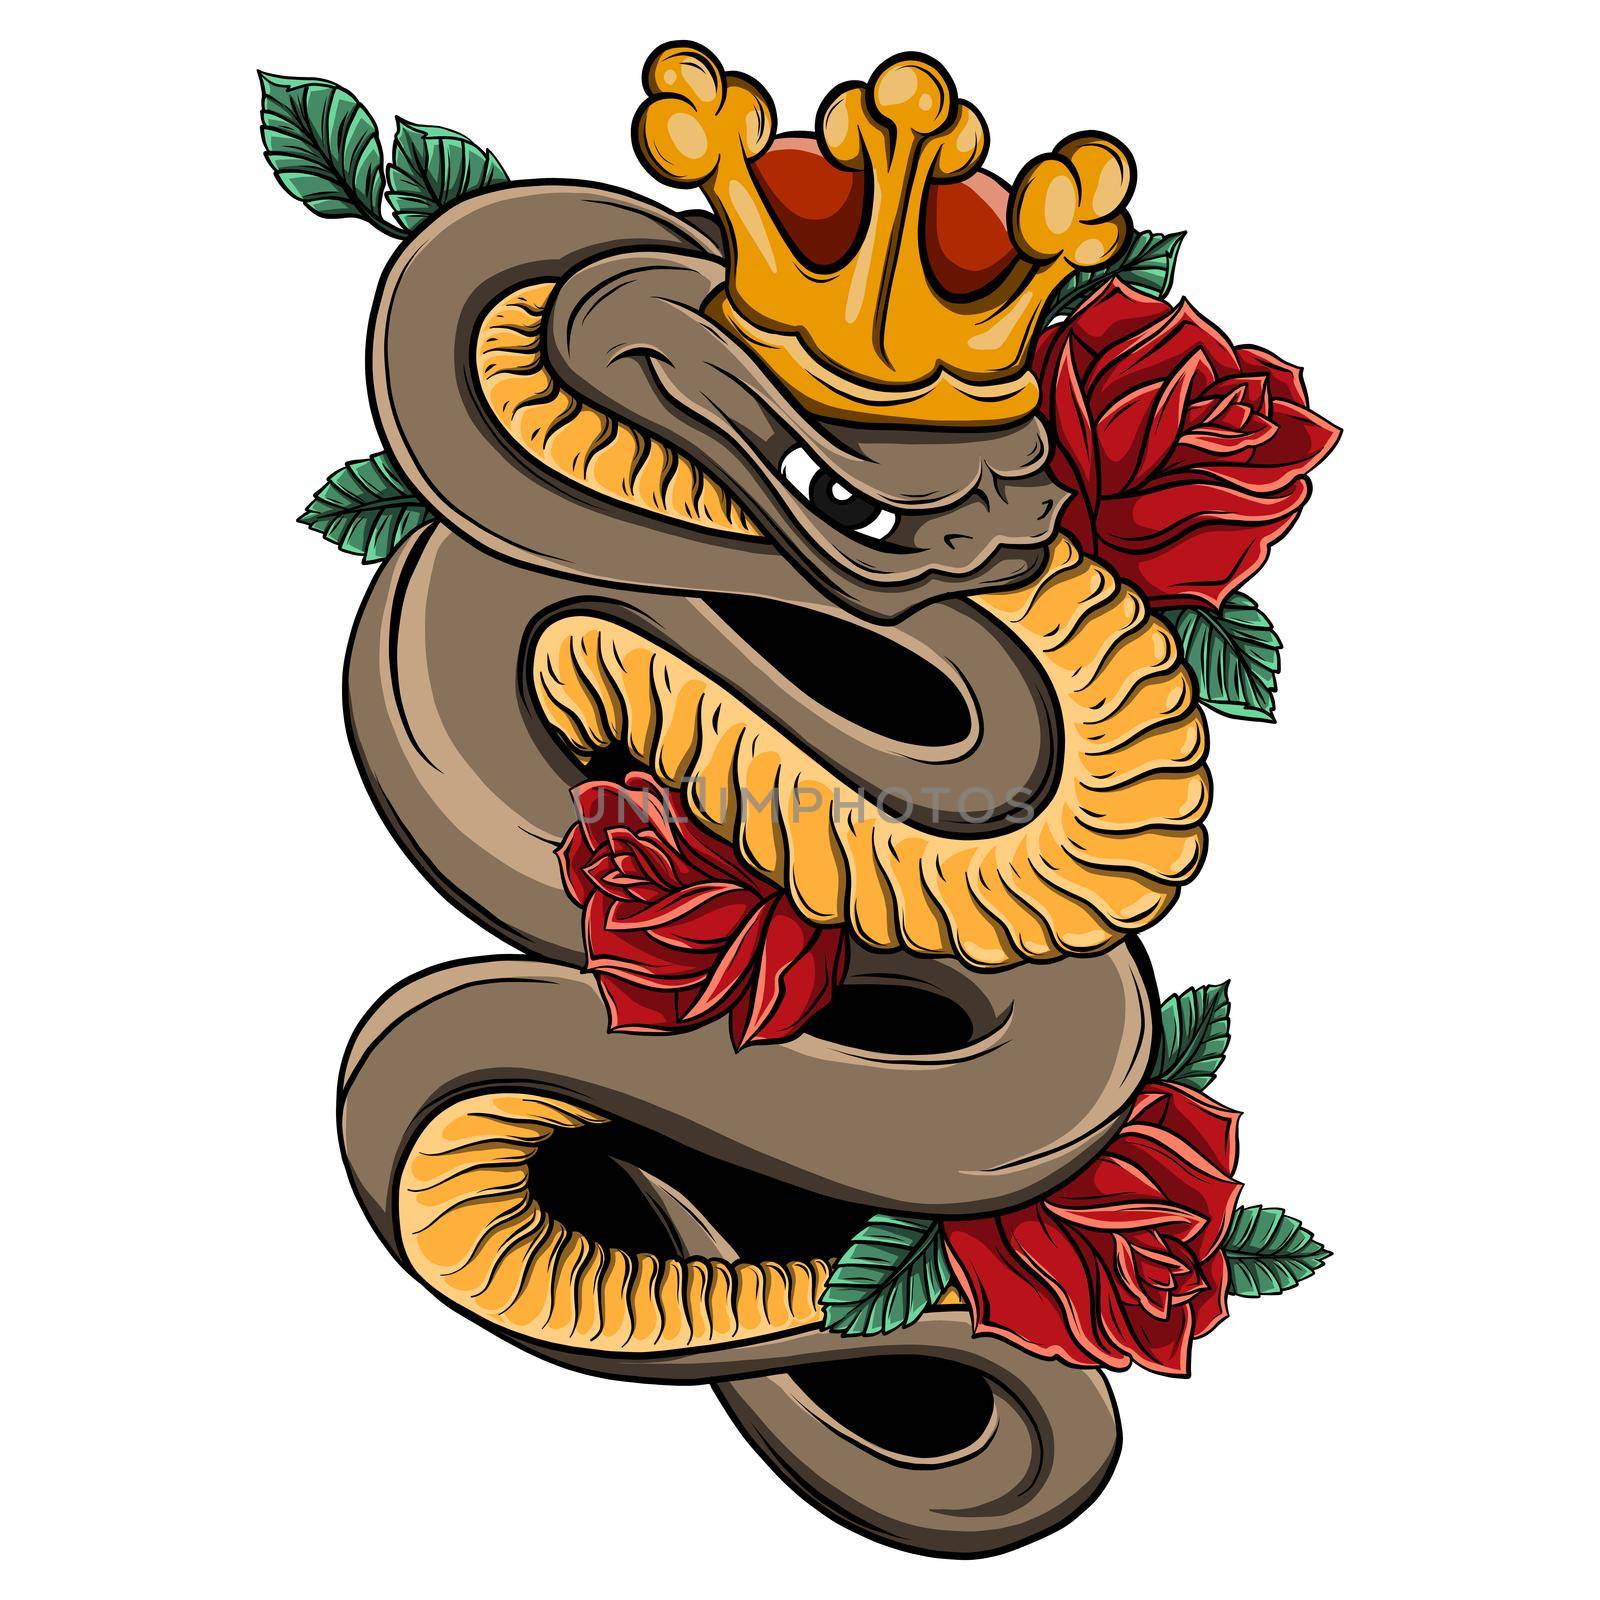 Ink and pen drawing, snake and roses on white background. by dean